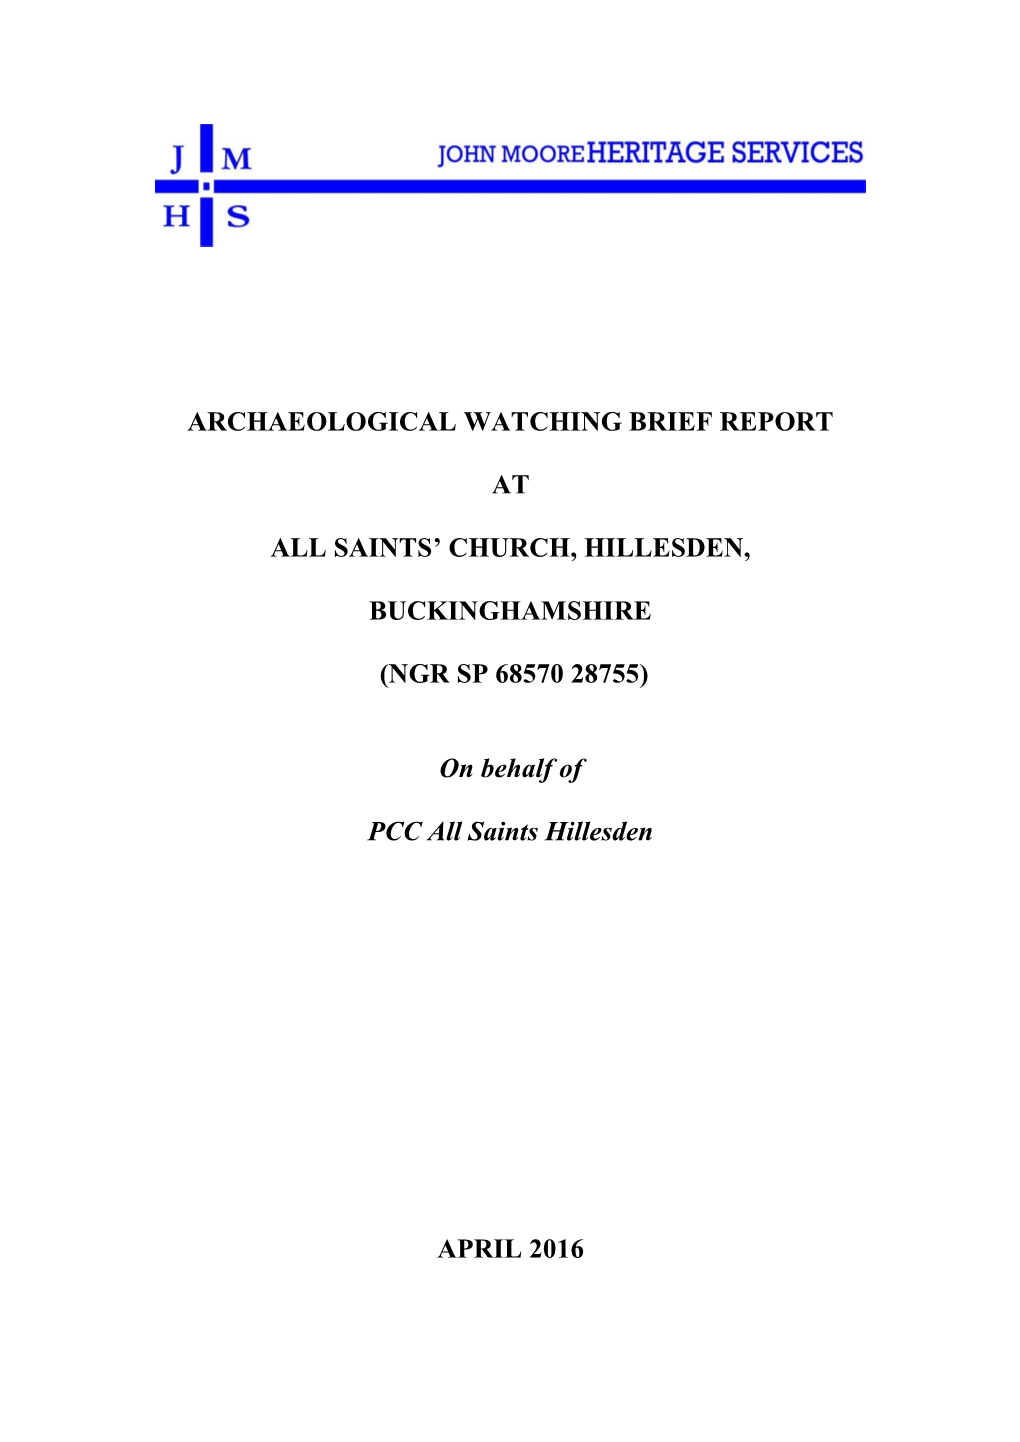 Archaeological Watching Brief Report at All Saints